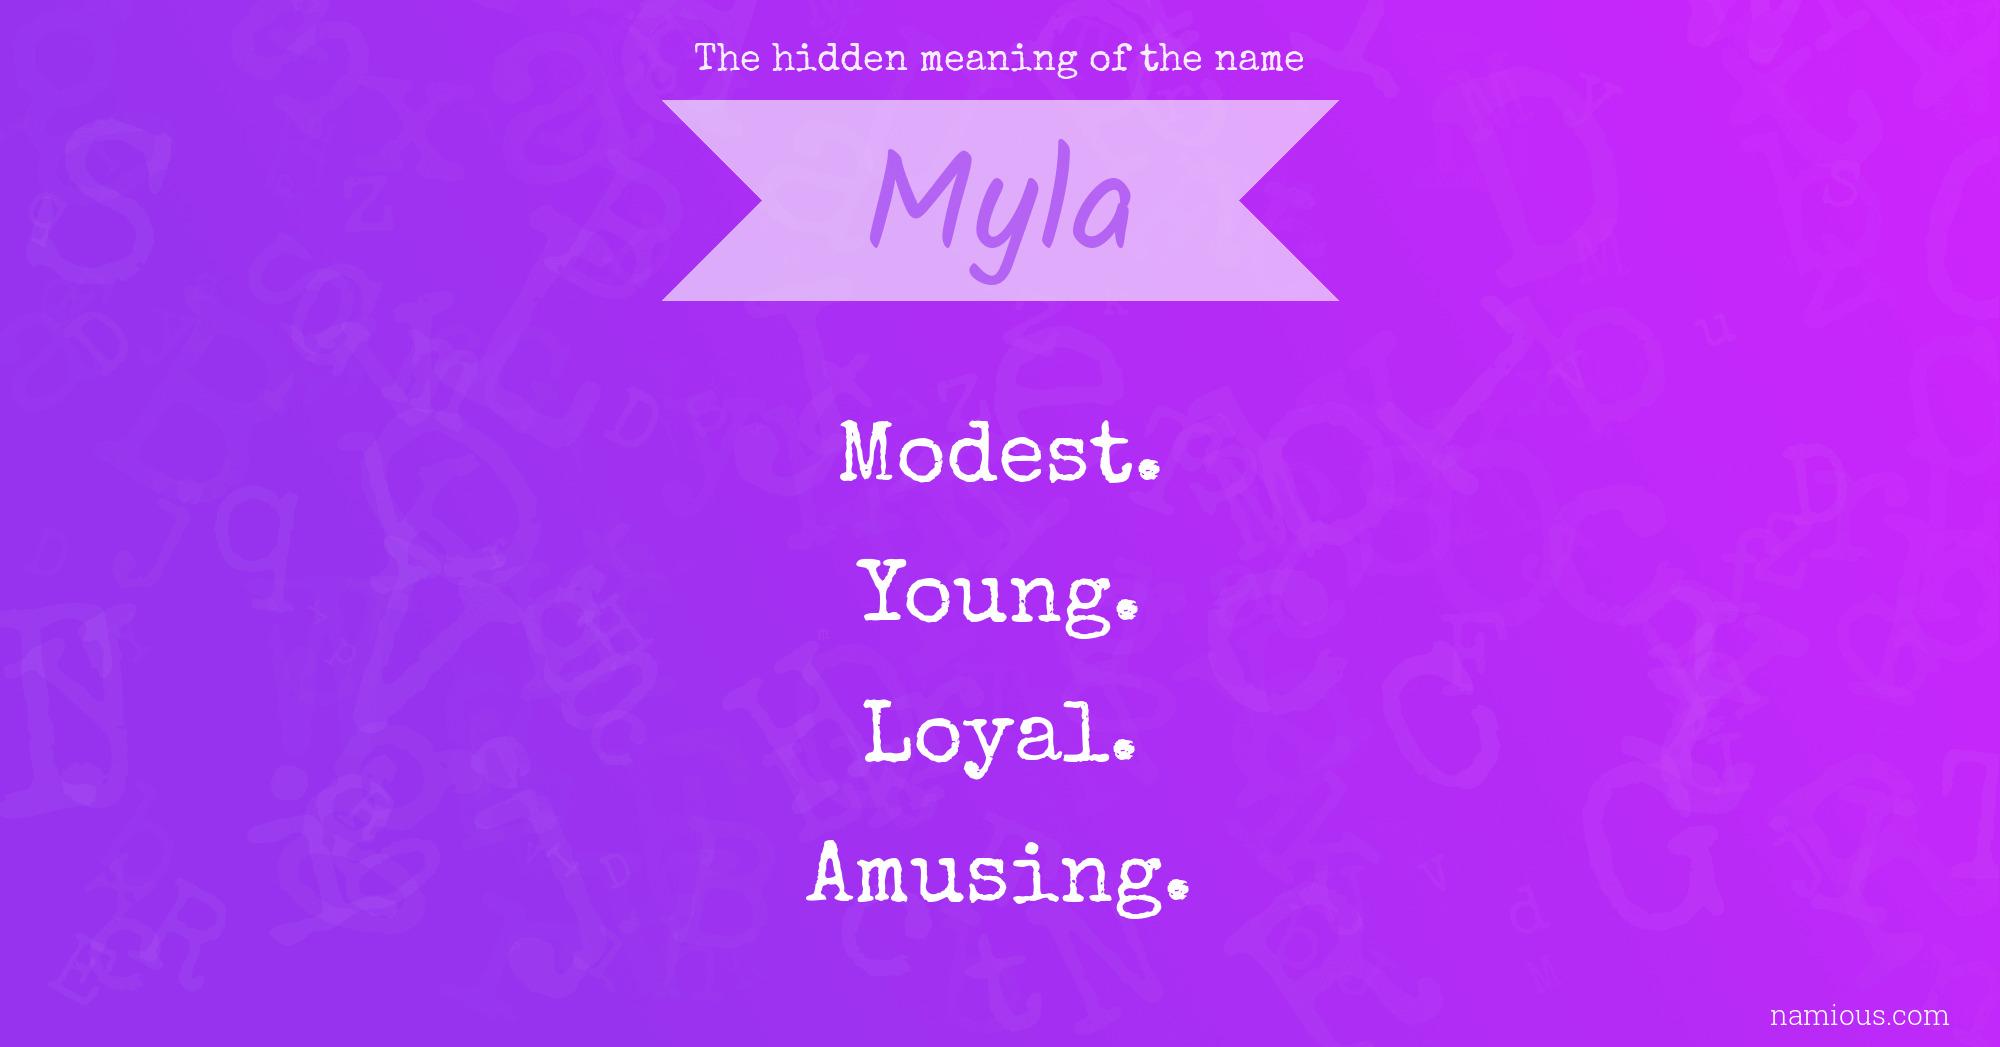 The hidden meaning of the name Myla